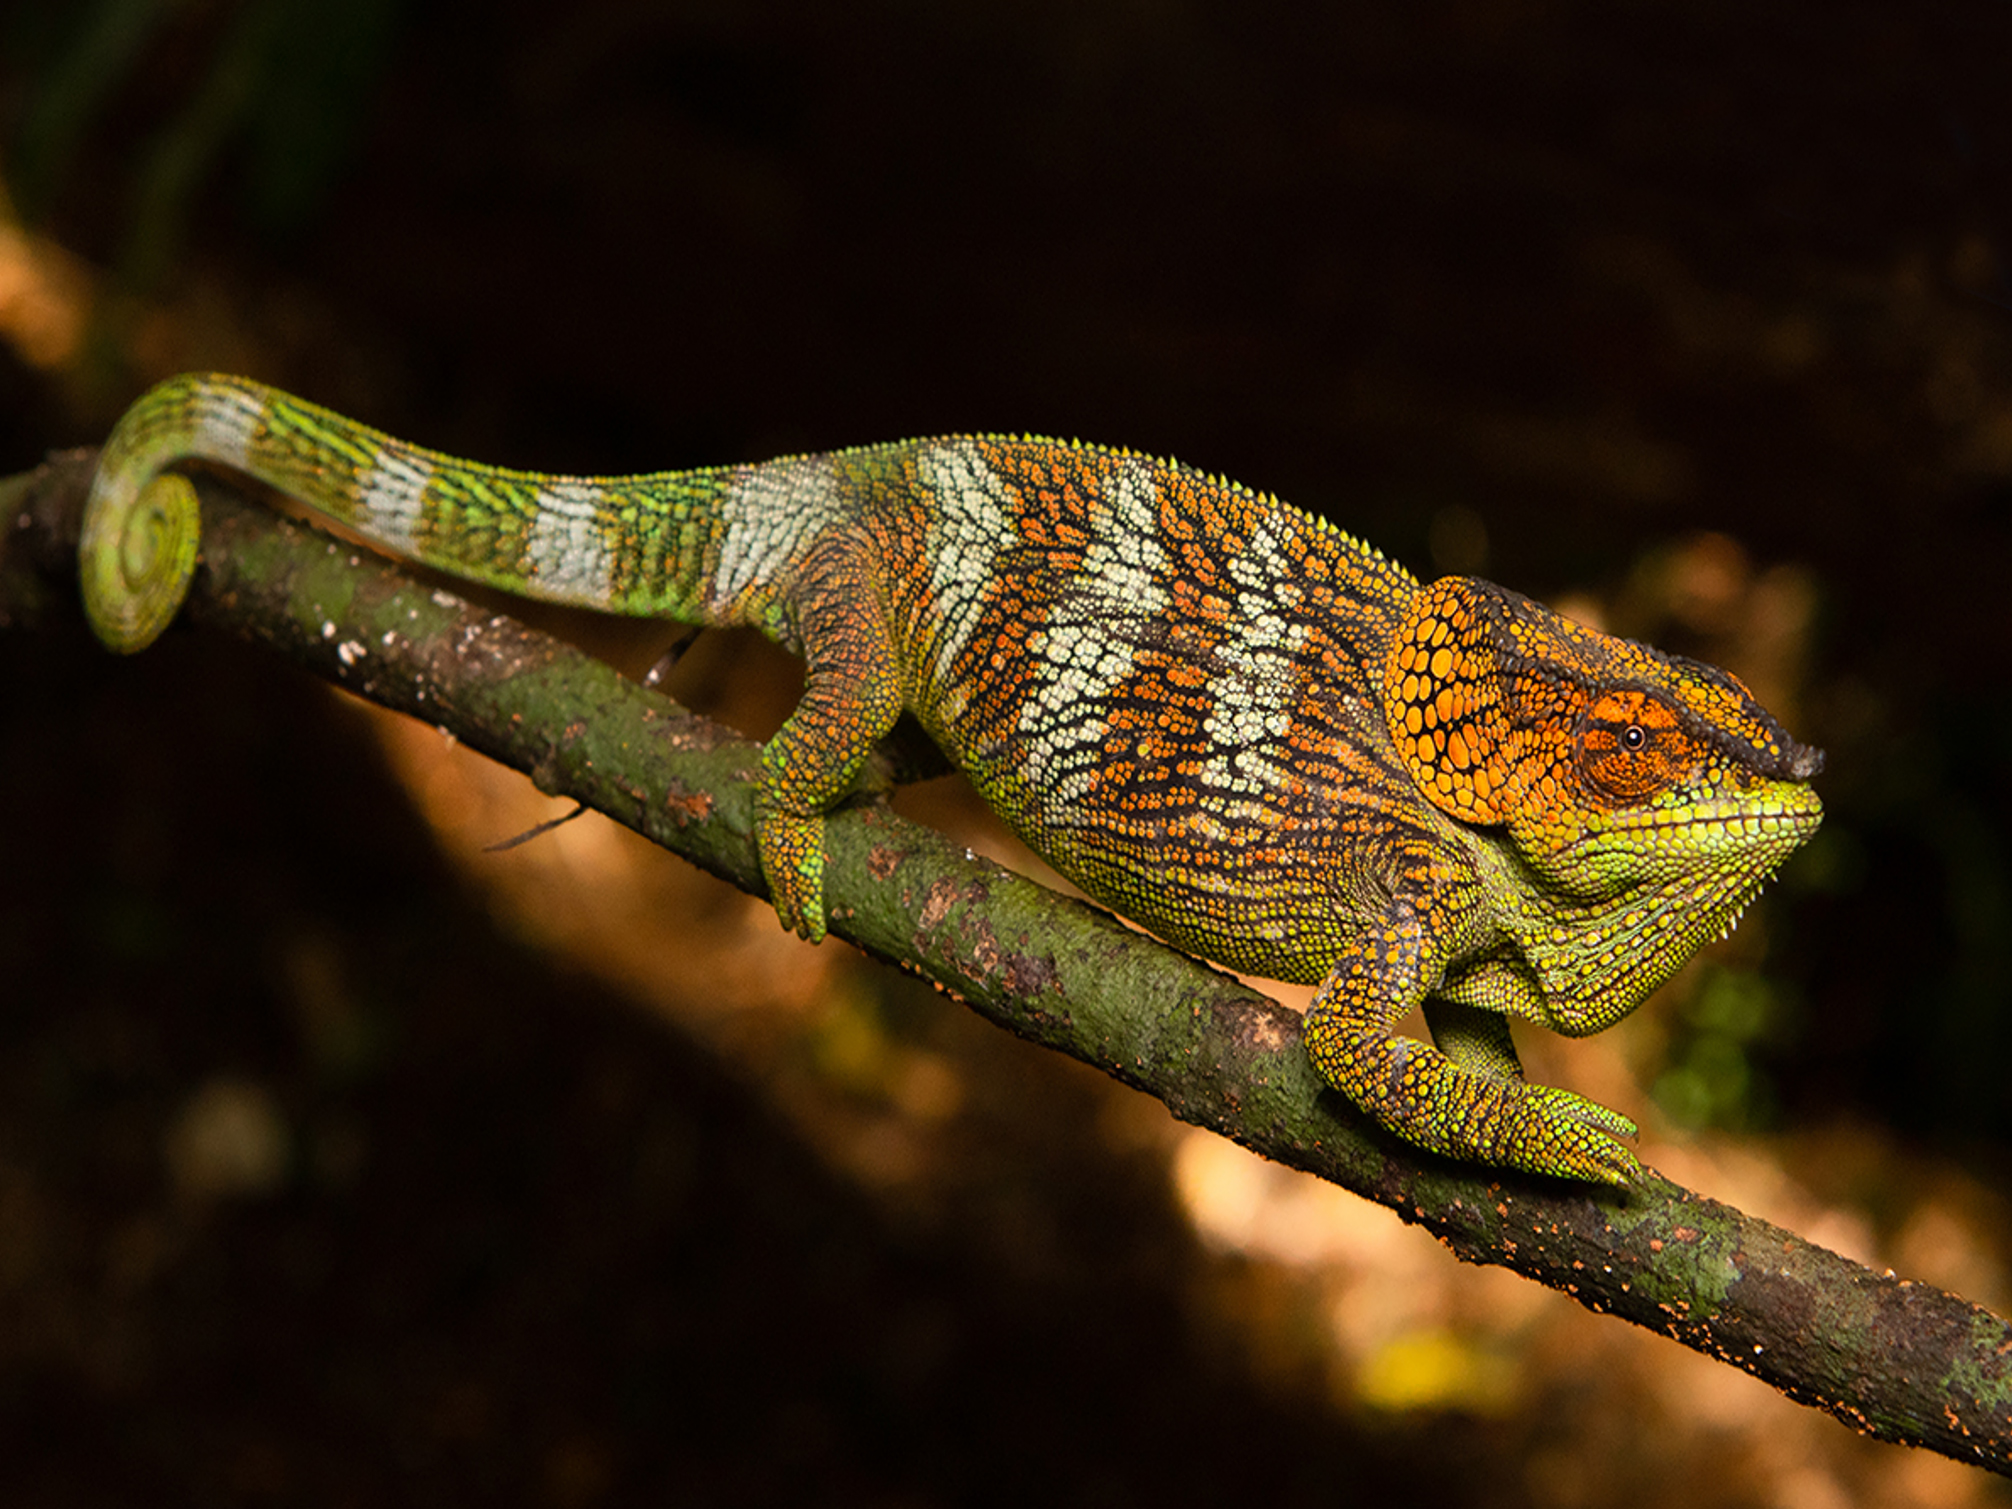 Lecture for vets on prophylaxis for chameleons